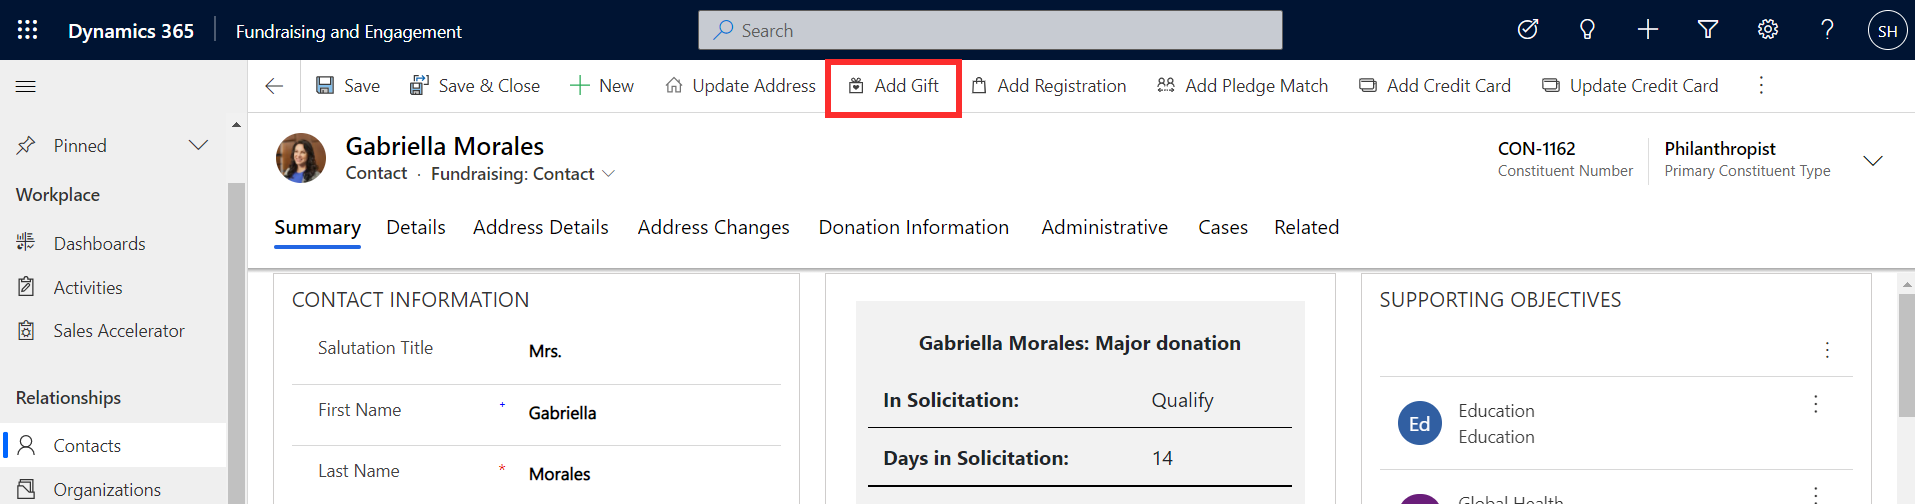 Screenshot of Dynamics 365 Fundraising and Engagement Contacts with the Add Gift button highlighted.